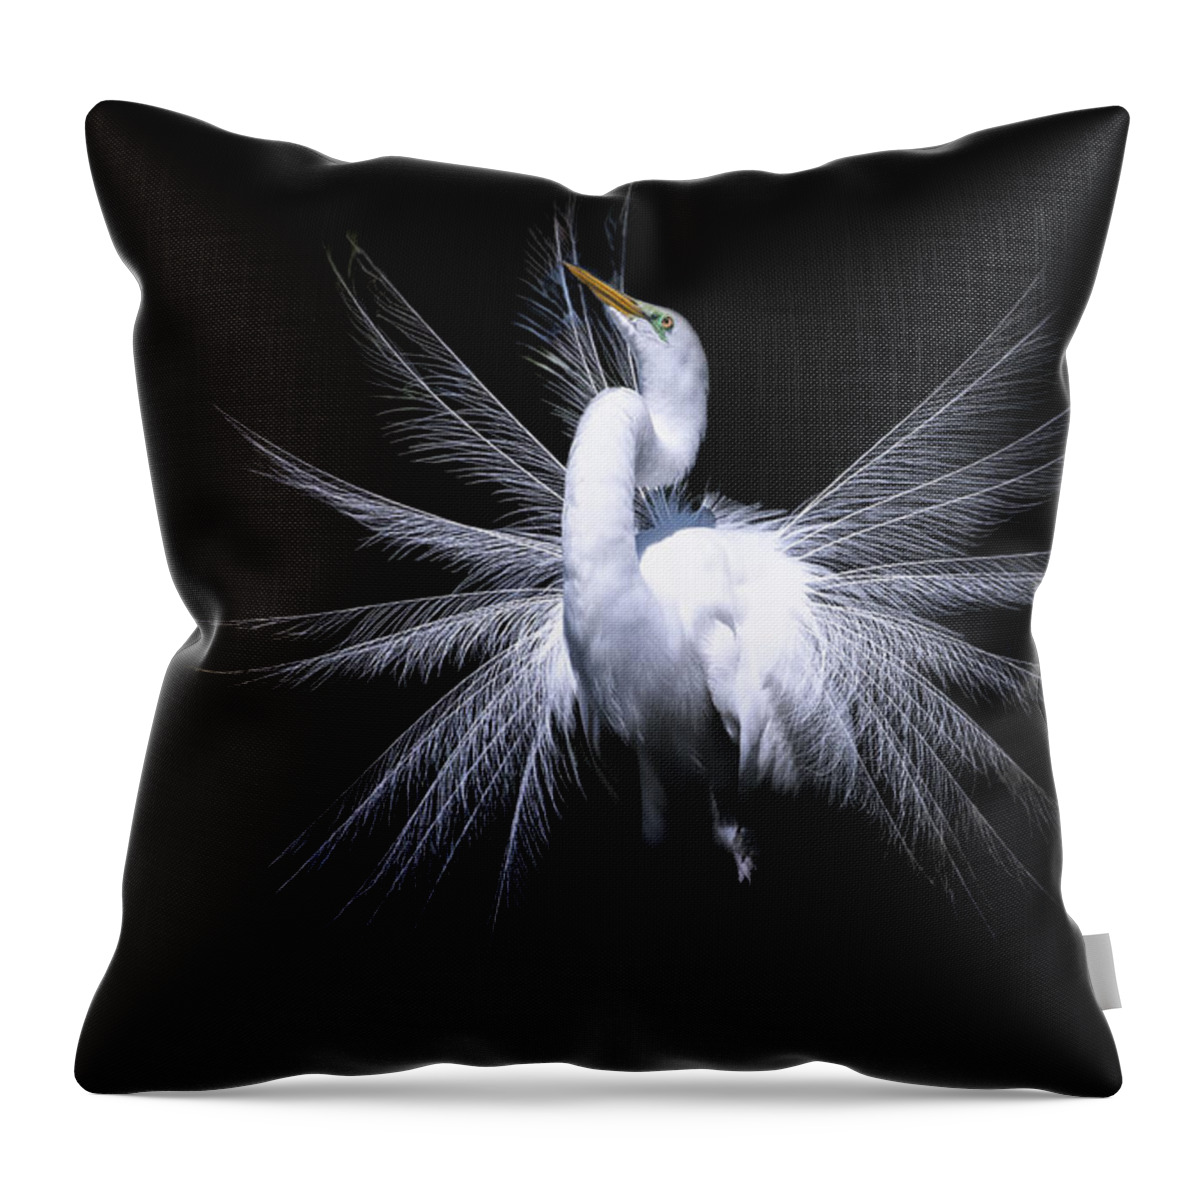 Crystal Yingling Throw Pillow featuring the photograph The Fan by Ghostwinds Photography